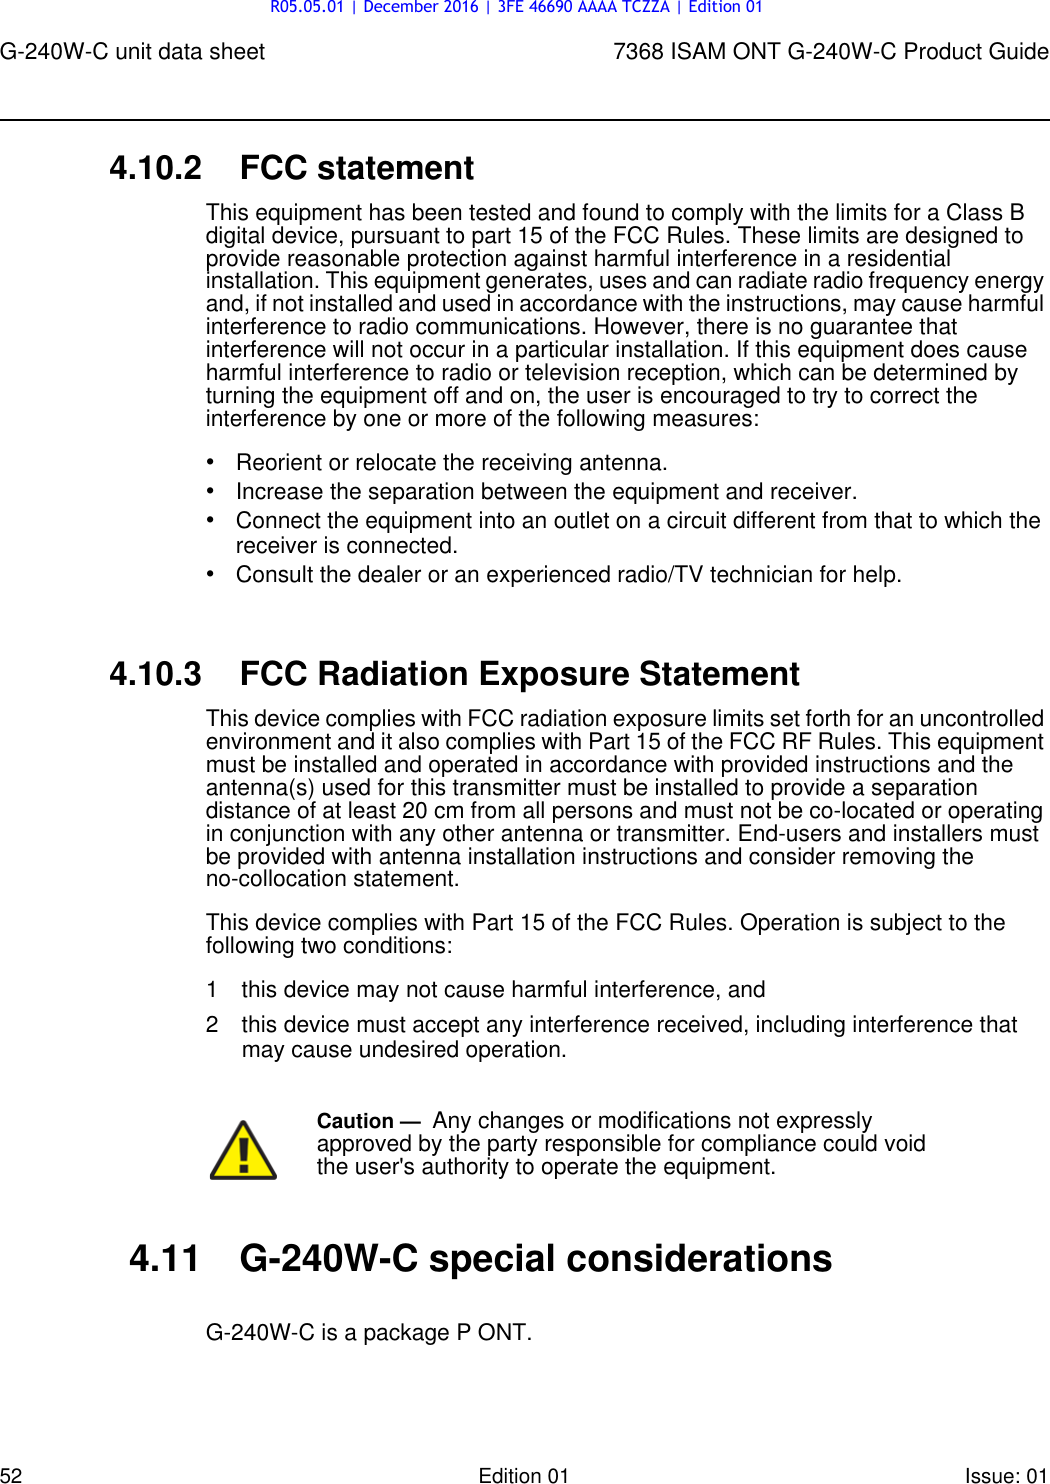 Page 52 of Nokia Bell G240W-C GPON ONU User Manual 7368 ISAM ONT G 240W B Product Guide